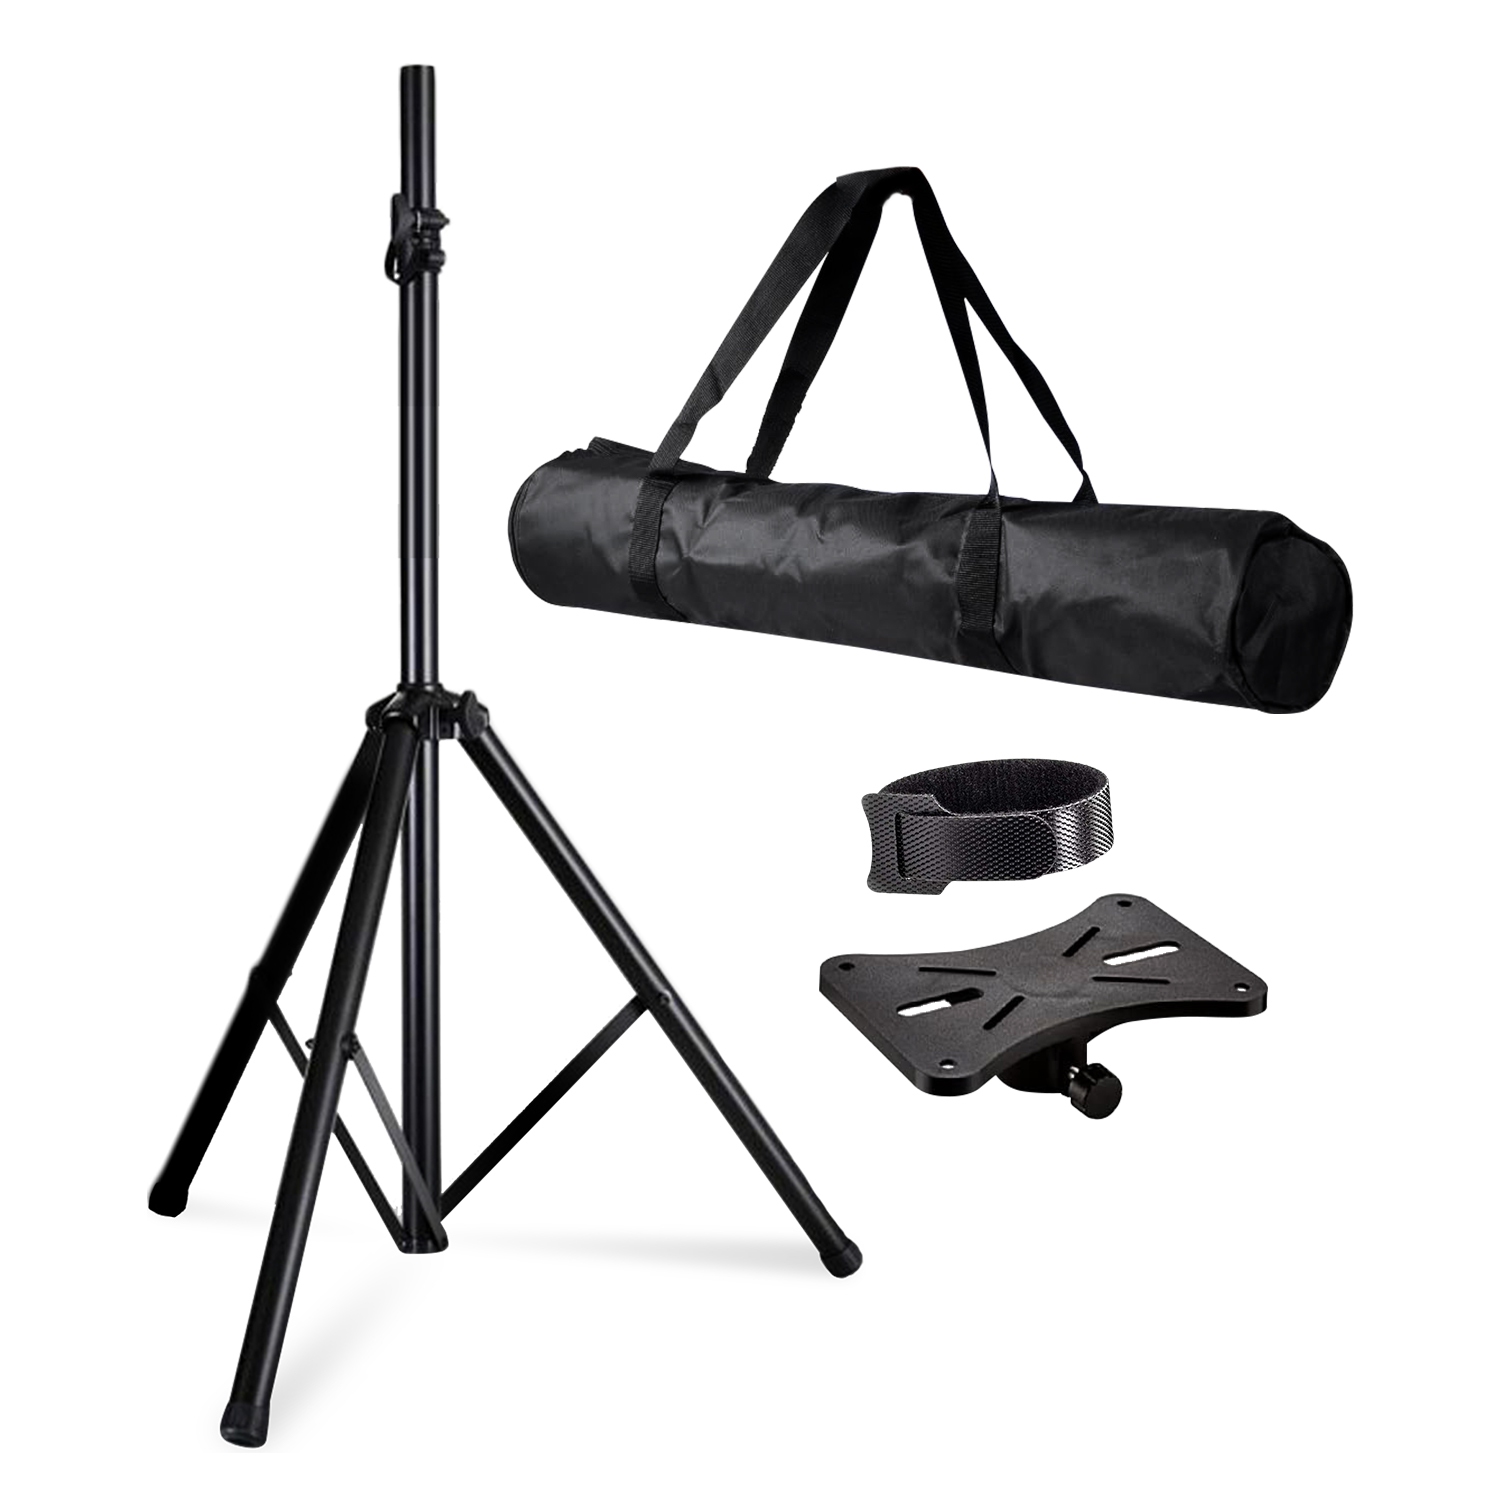 5 Core Speakers Stands 1 Piece Black Heavy Duty Height Adjustable Tripod PA Monitor Holder for Large Speakers DJ Stand Para Bocinas Includes Carry Bag -SS HD 1PK BLK BAG